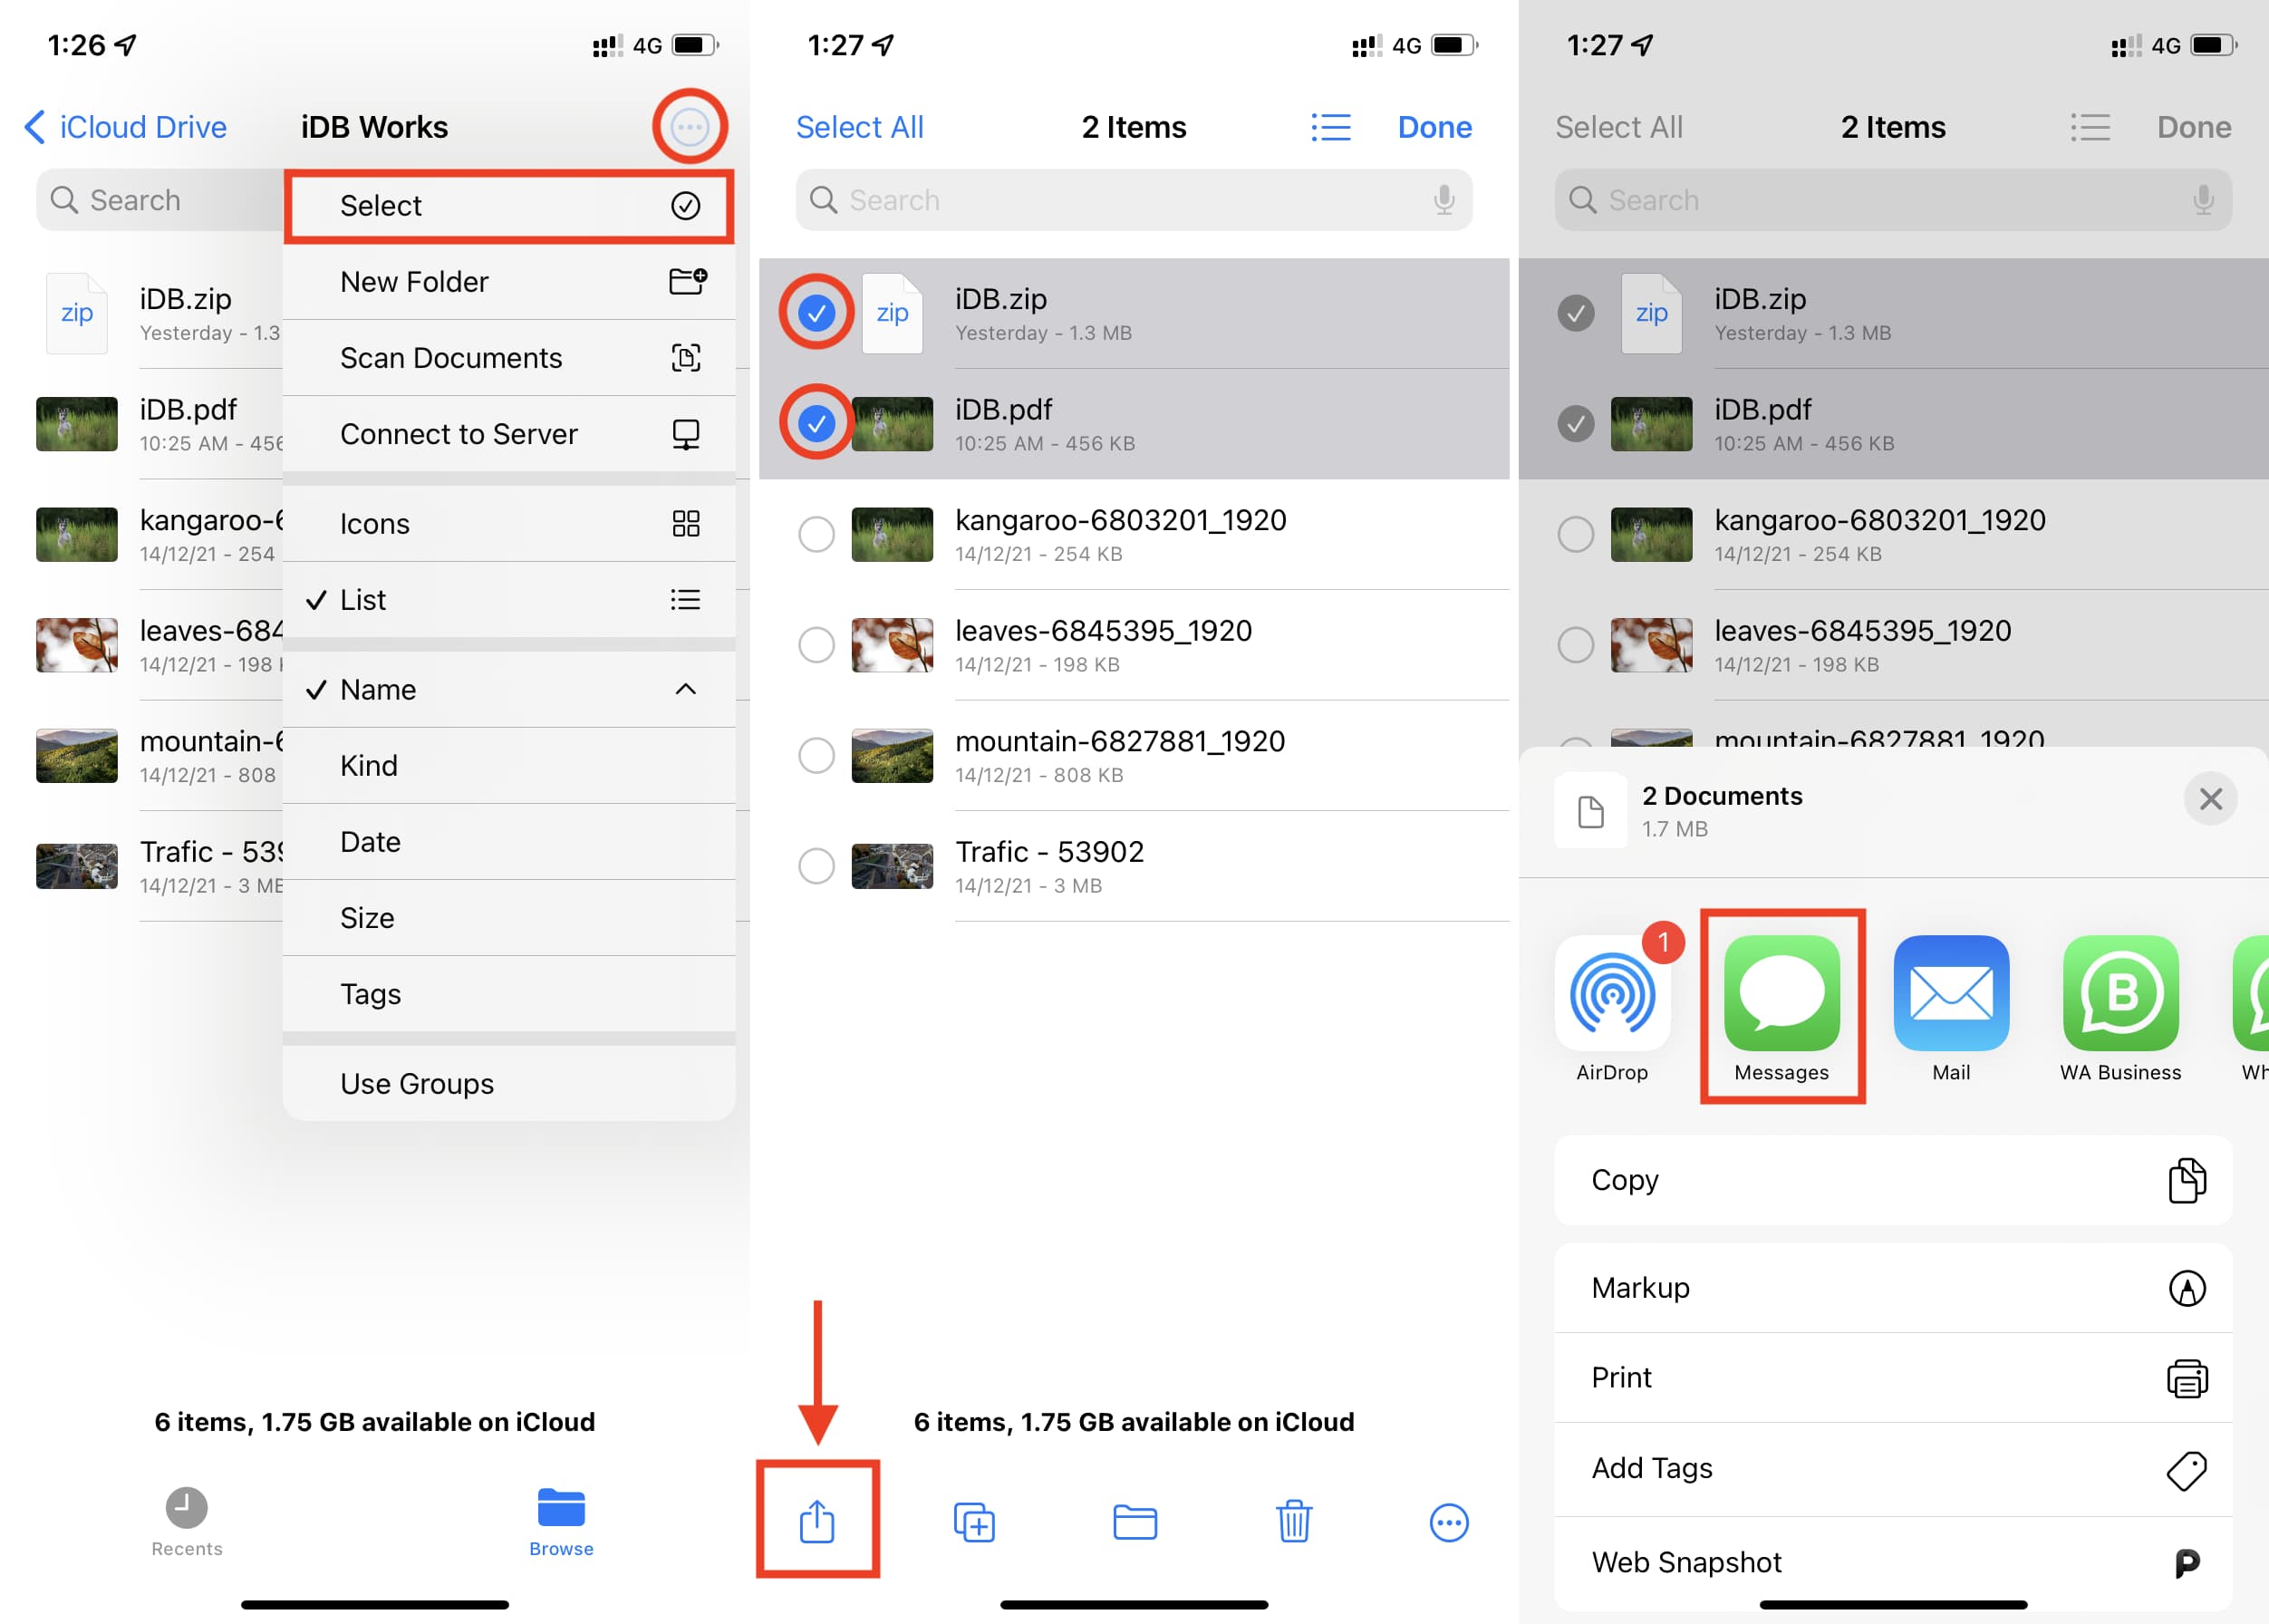 Select PDF, ZIP, and other files in iPhone Files app to send on iMessage